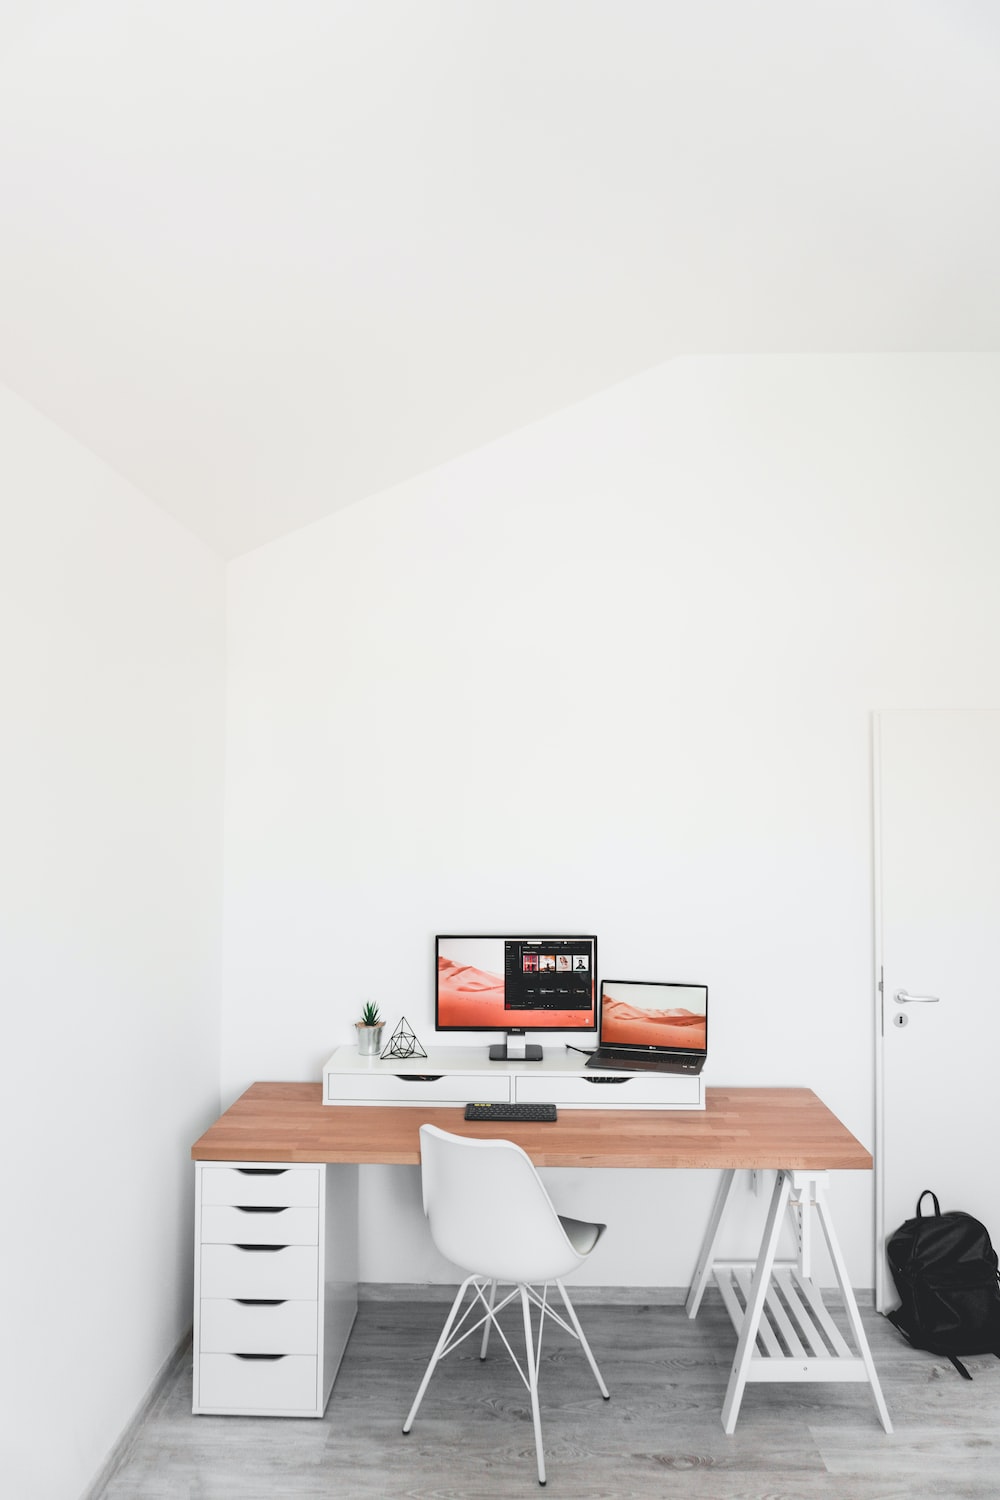 Is south facing office desk good?